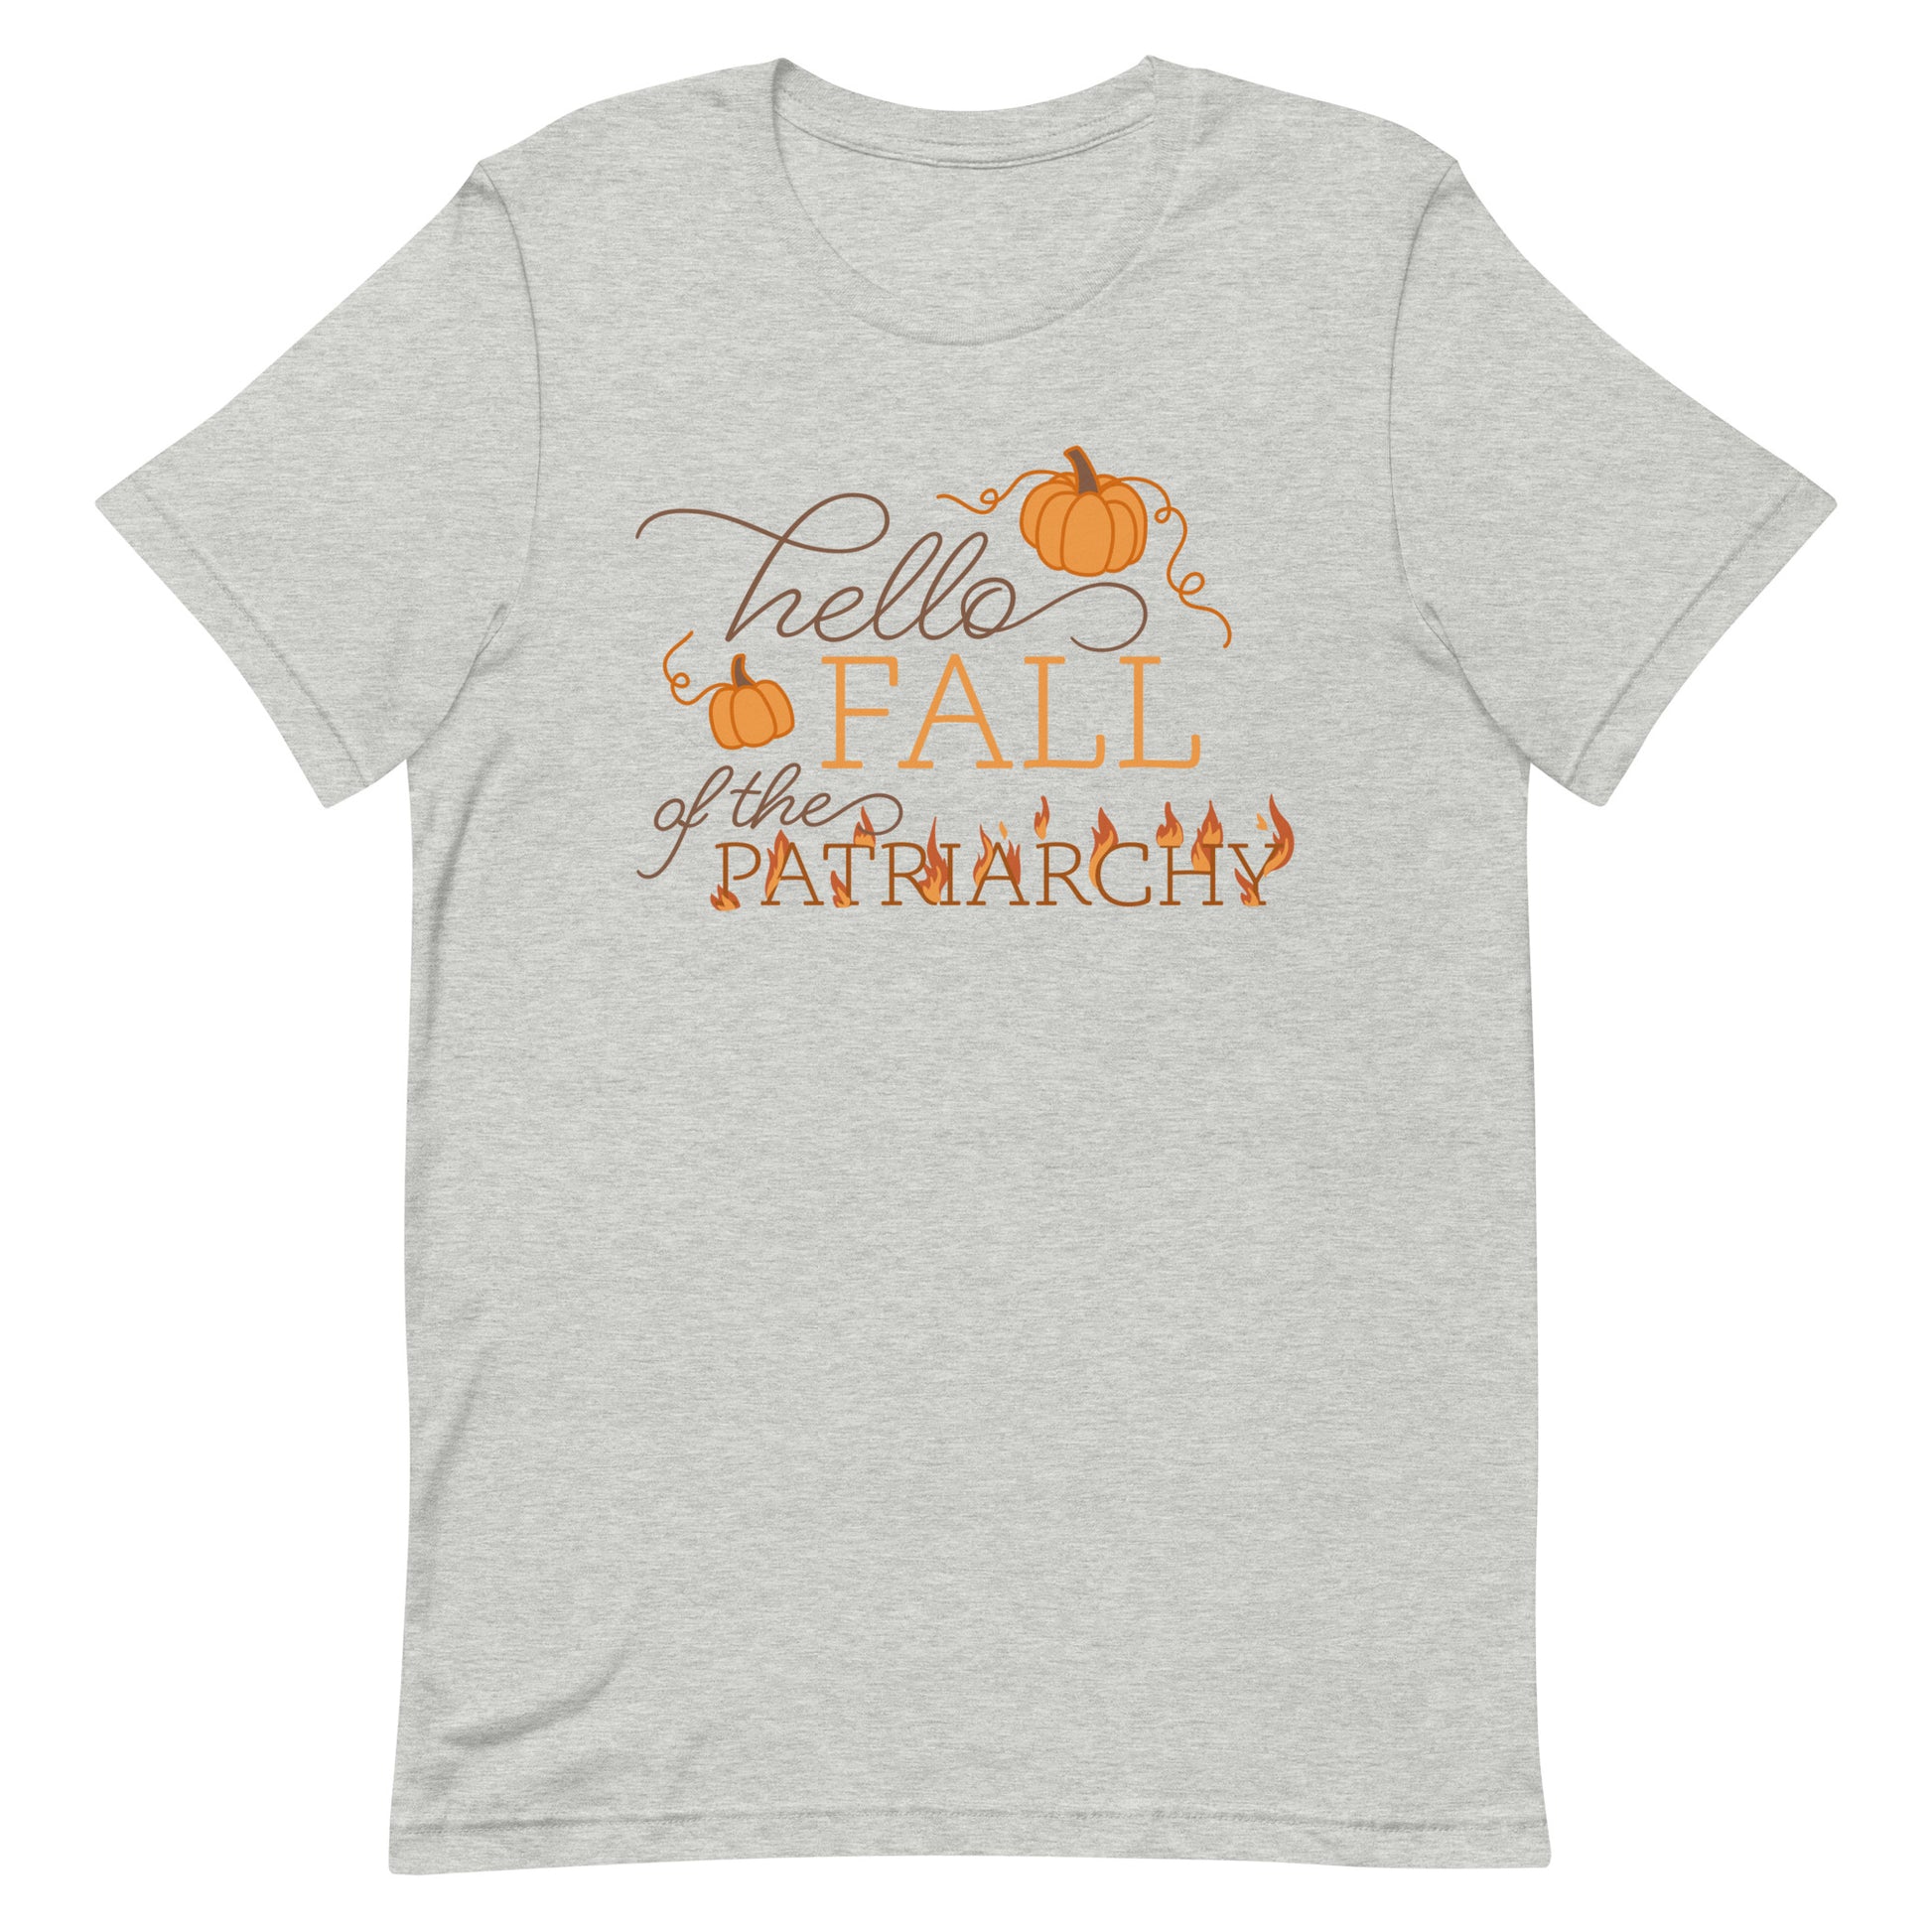 A heathered grey crewneck t-shirt featuring text that reads "Hello fall of the patriarchy". Pumpkins surround the first half of the text and the word "patriarchy" is on fire.